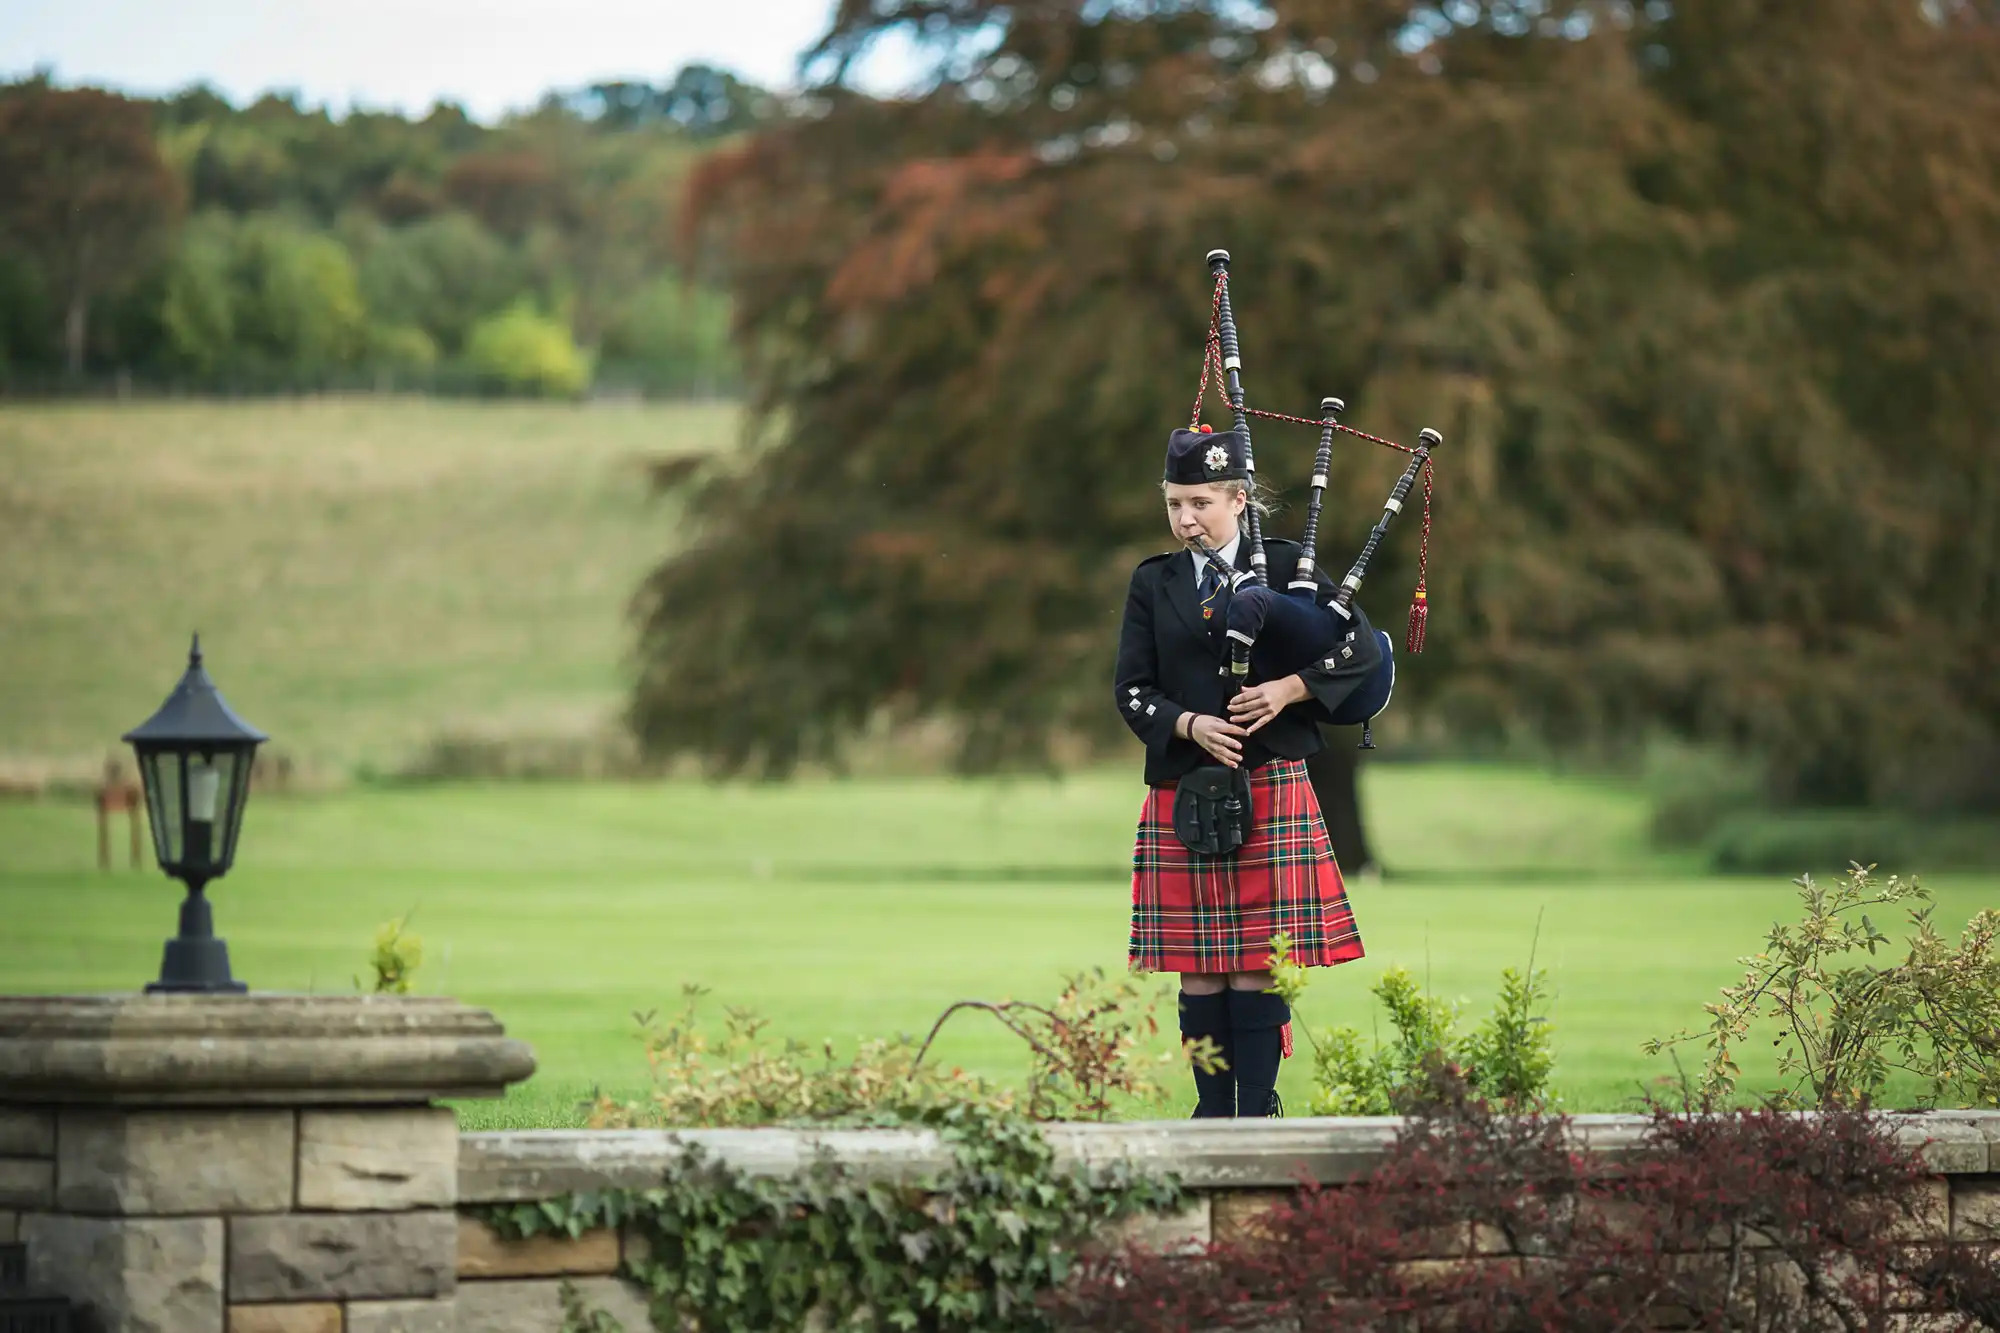 A bagpiper in traditional tartan kilt and uniform plays beside a stone wall with a lush, wooded backdrop.